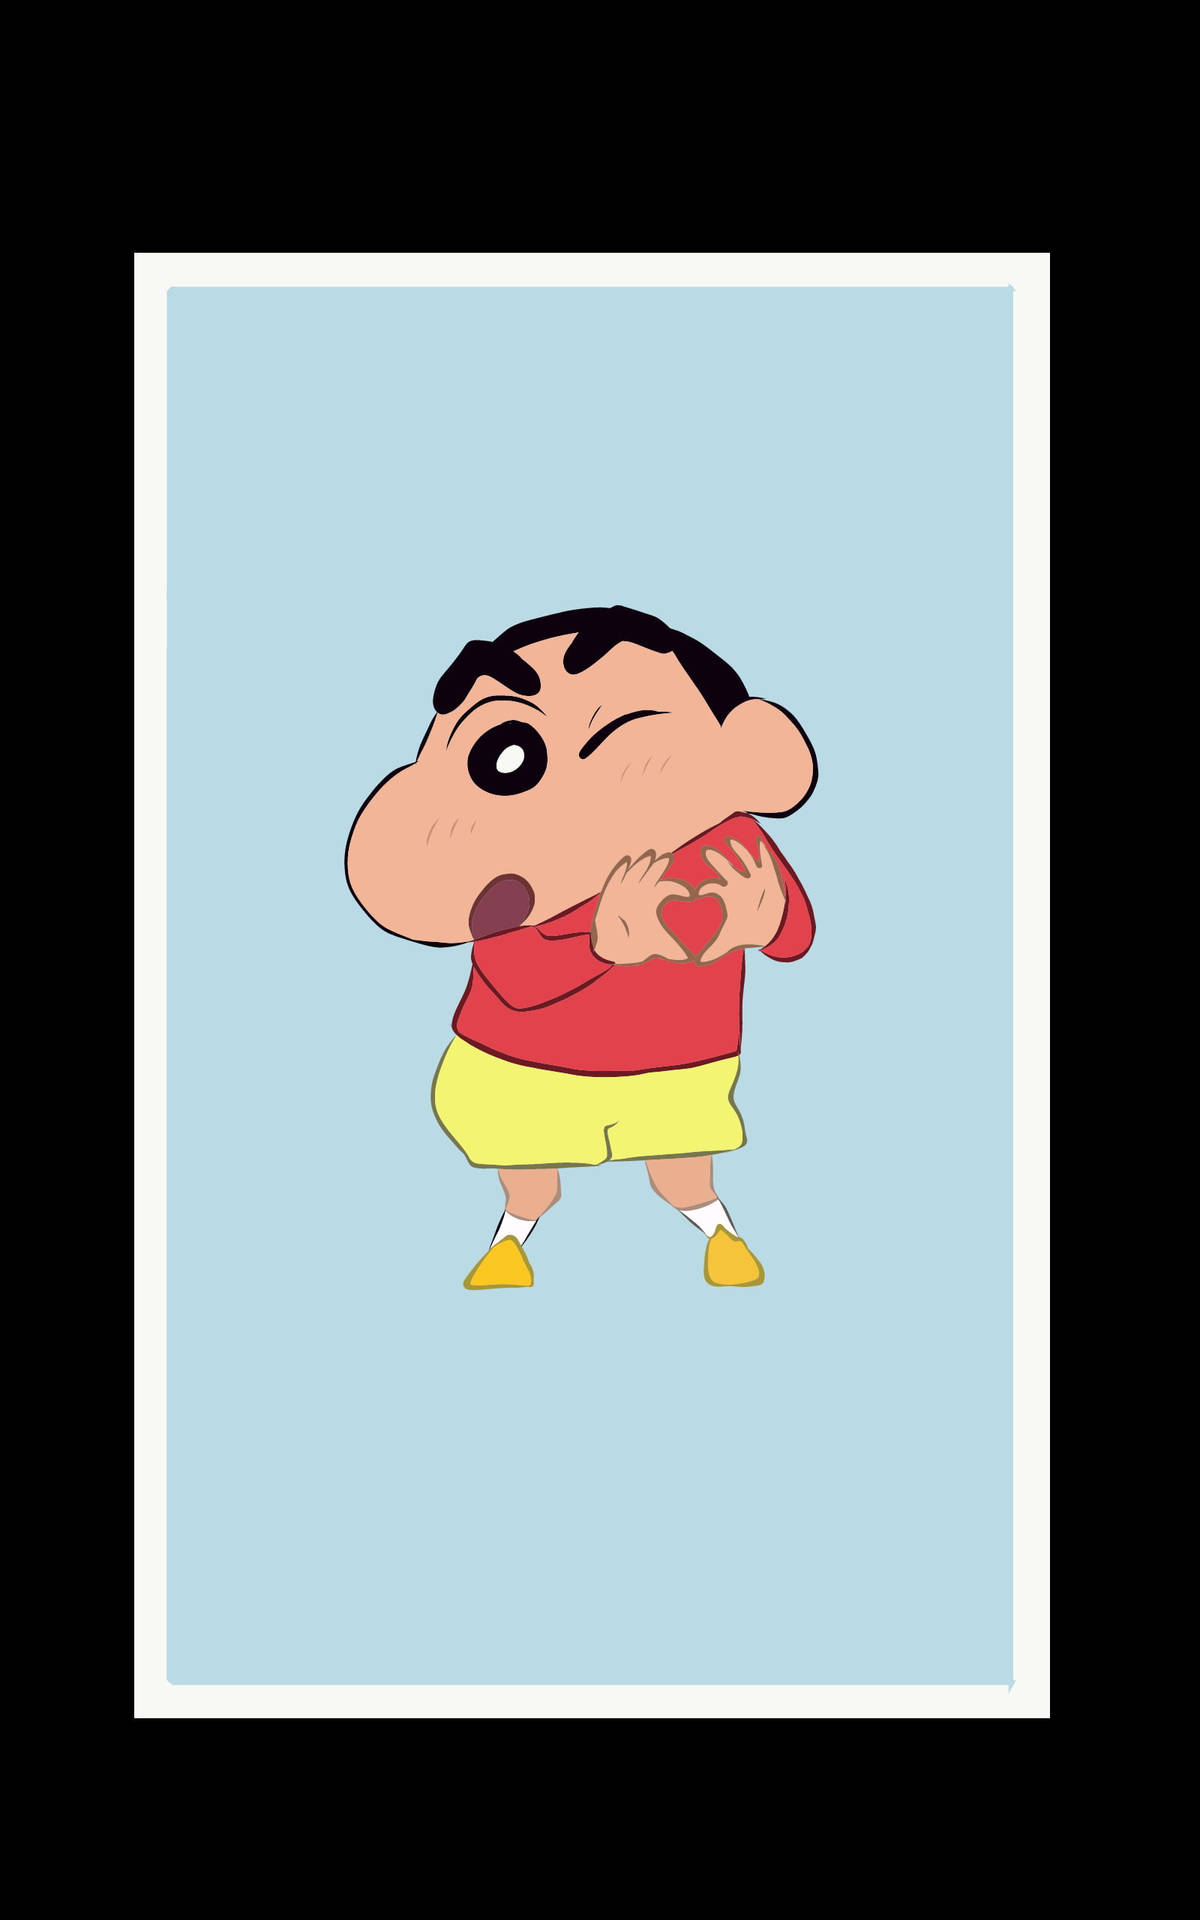 Finest Aesthetics Of Shinchan With Heart Sign